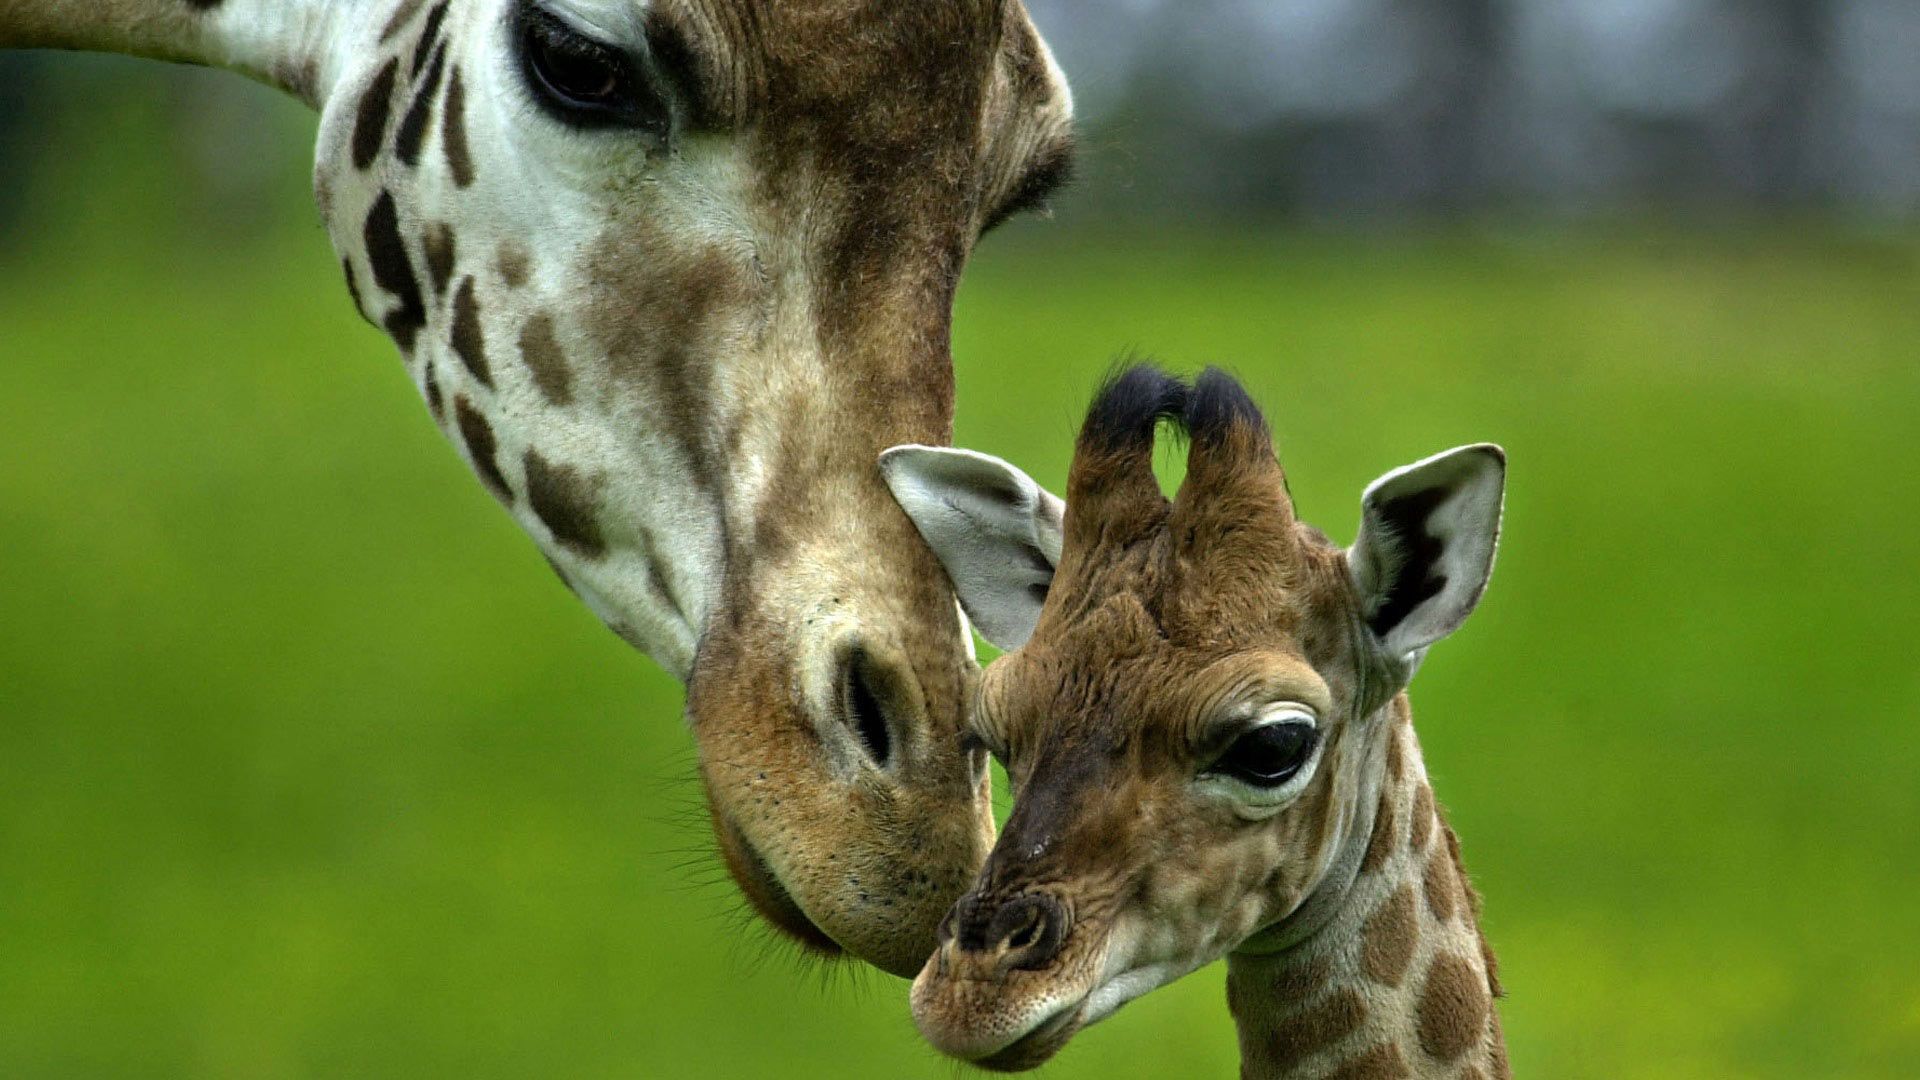 animals, young, spotted, spotty, head, care, joey, giraffe wallpaper for mobile